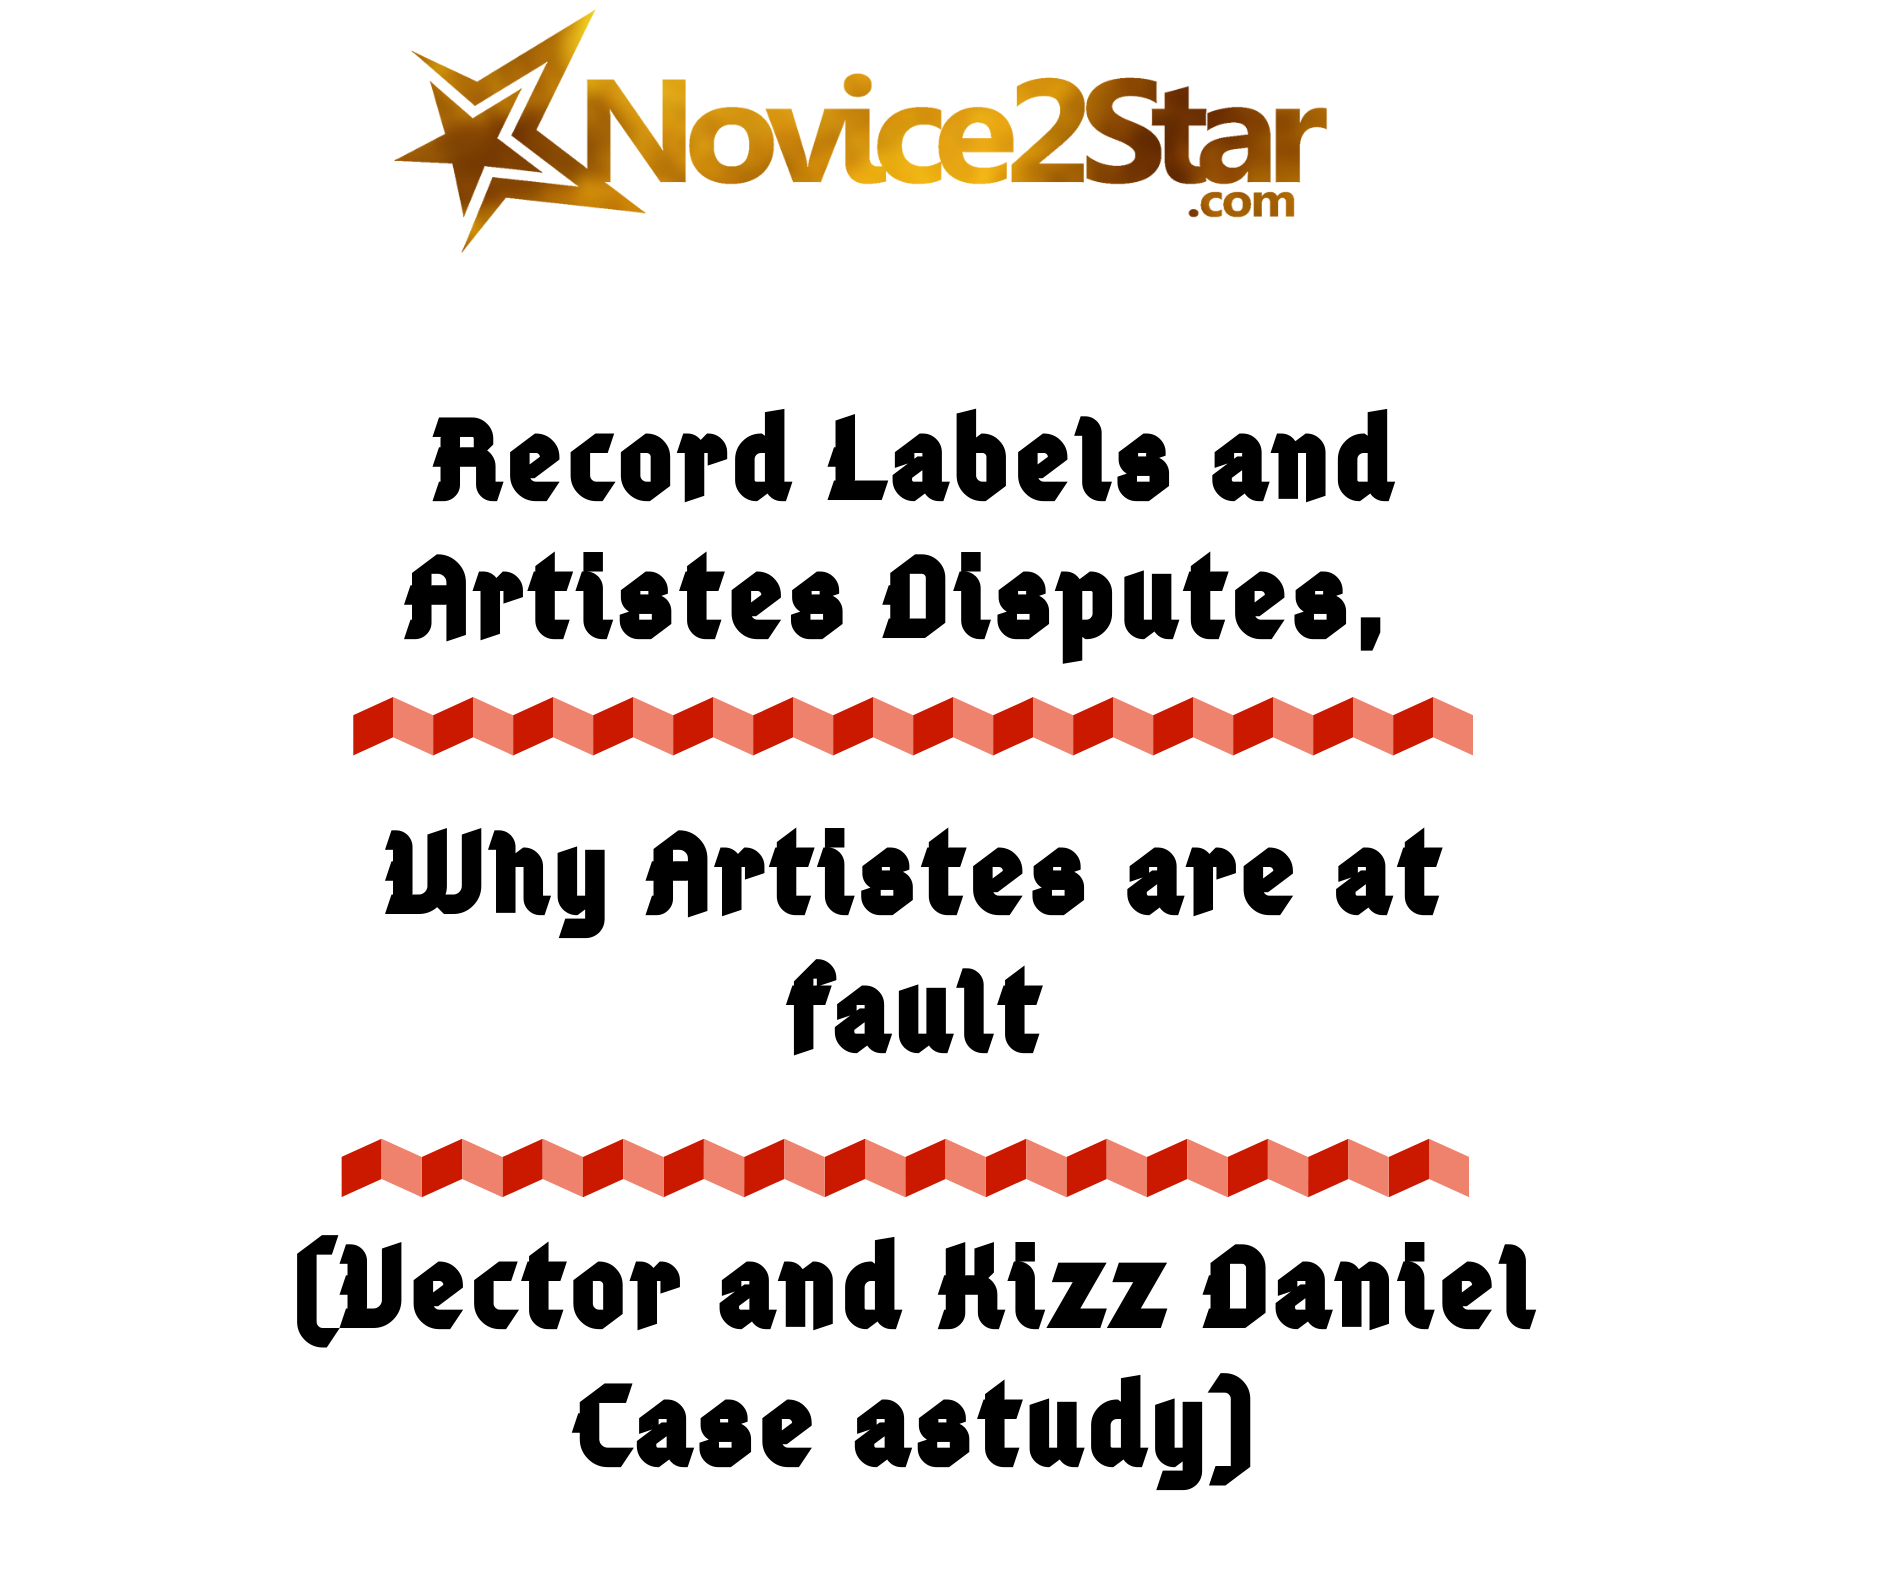 Record Labels and Artistes Disputes, Why Artistes are at fault (Vector and Kizz Daniel)